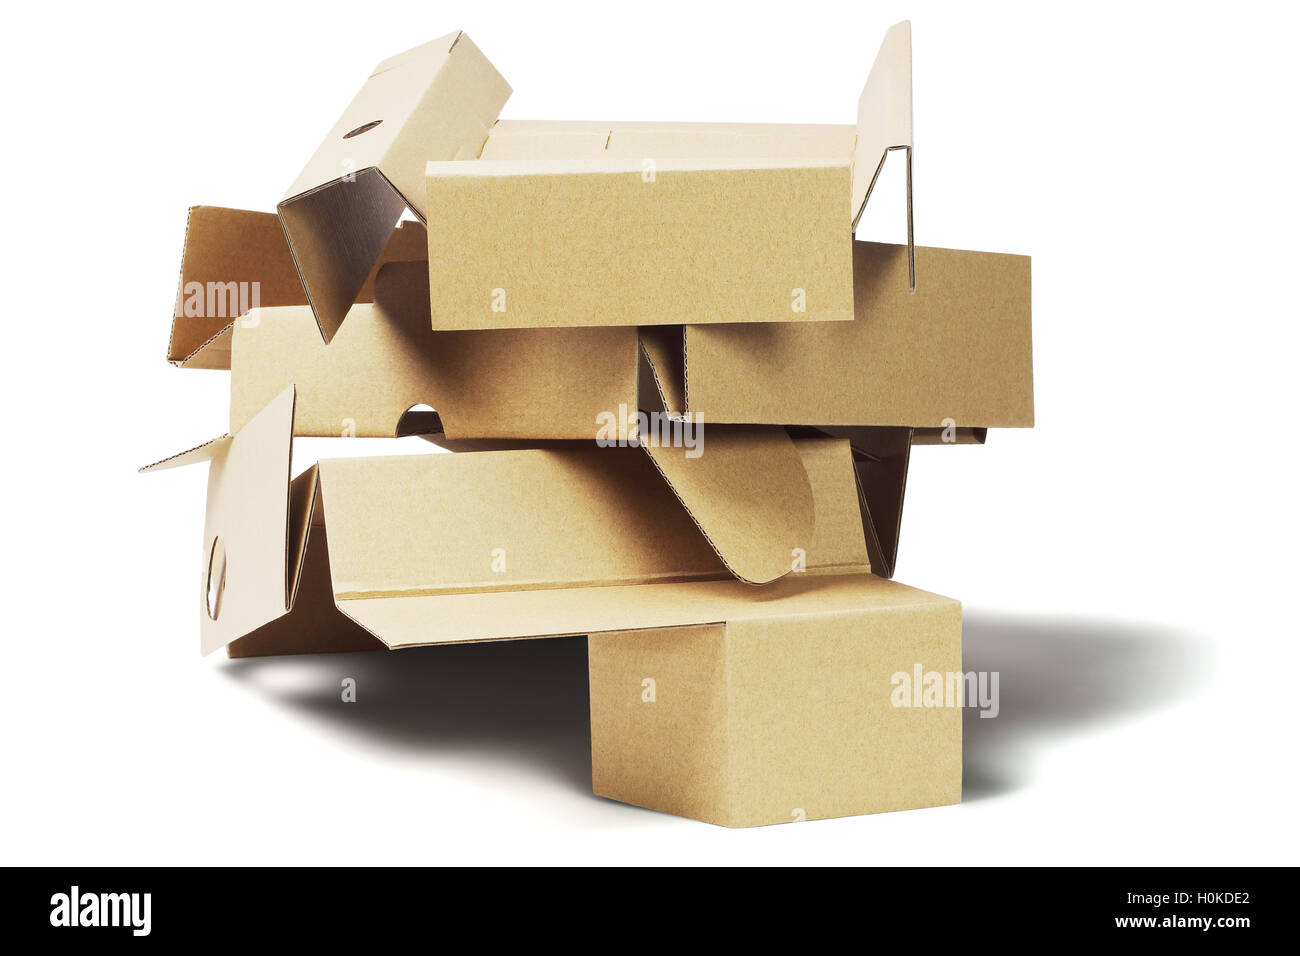 Stack of Packaging Cardboard For Recycling on White Background Stock Photo